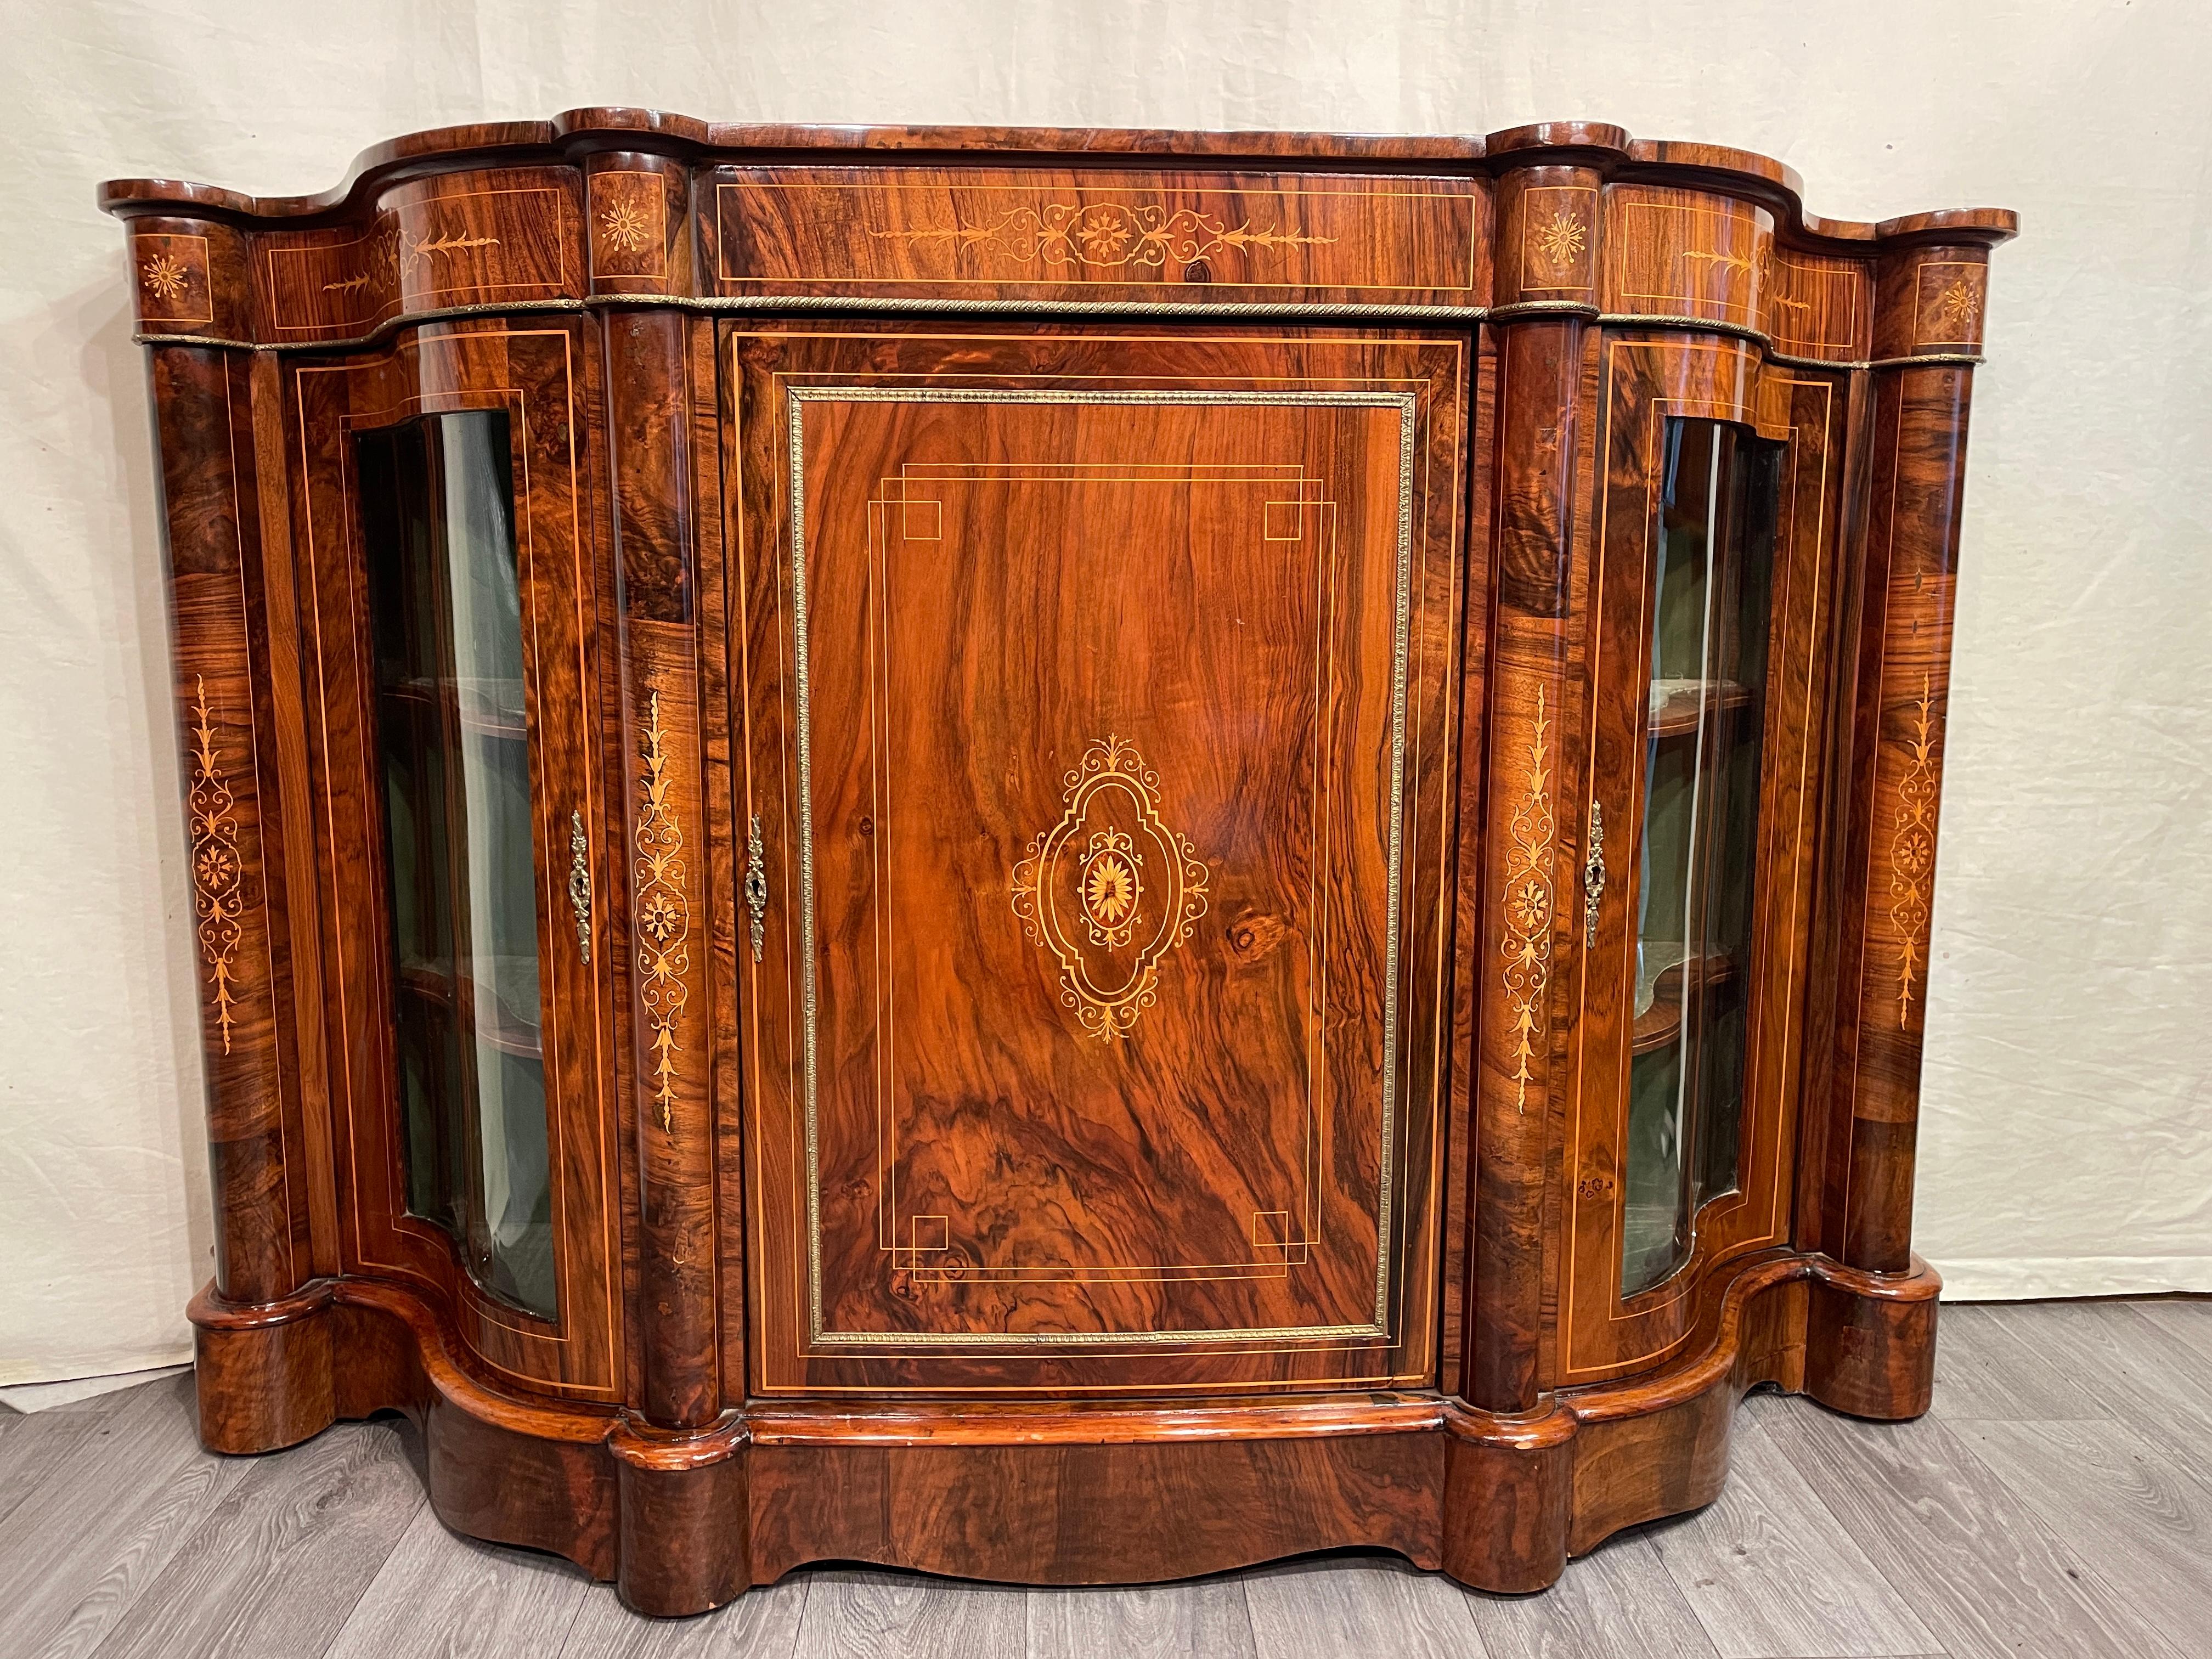 This gorgeous French Credenza was made during the 19th century. It is decorated with walnut veneer and has additional satinwood inlays of flower twines. The curved front is accentuated by four columns which are also decorated with twine inlays.